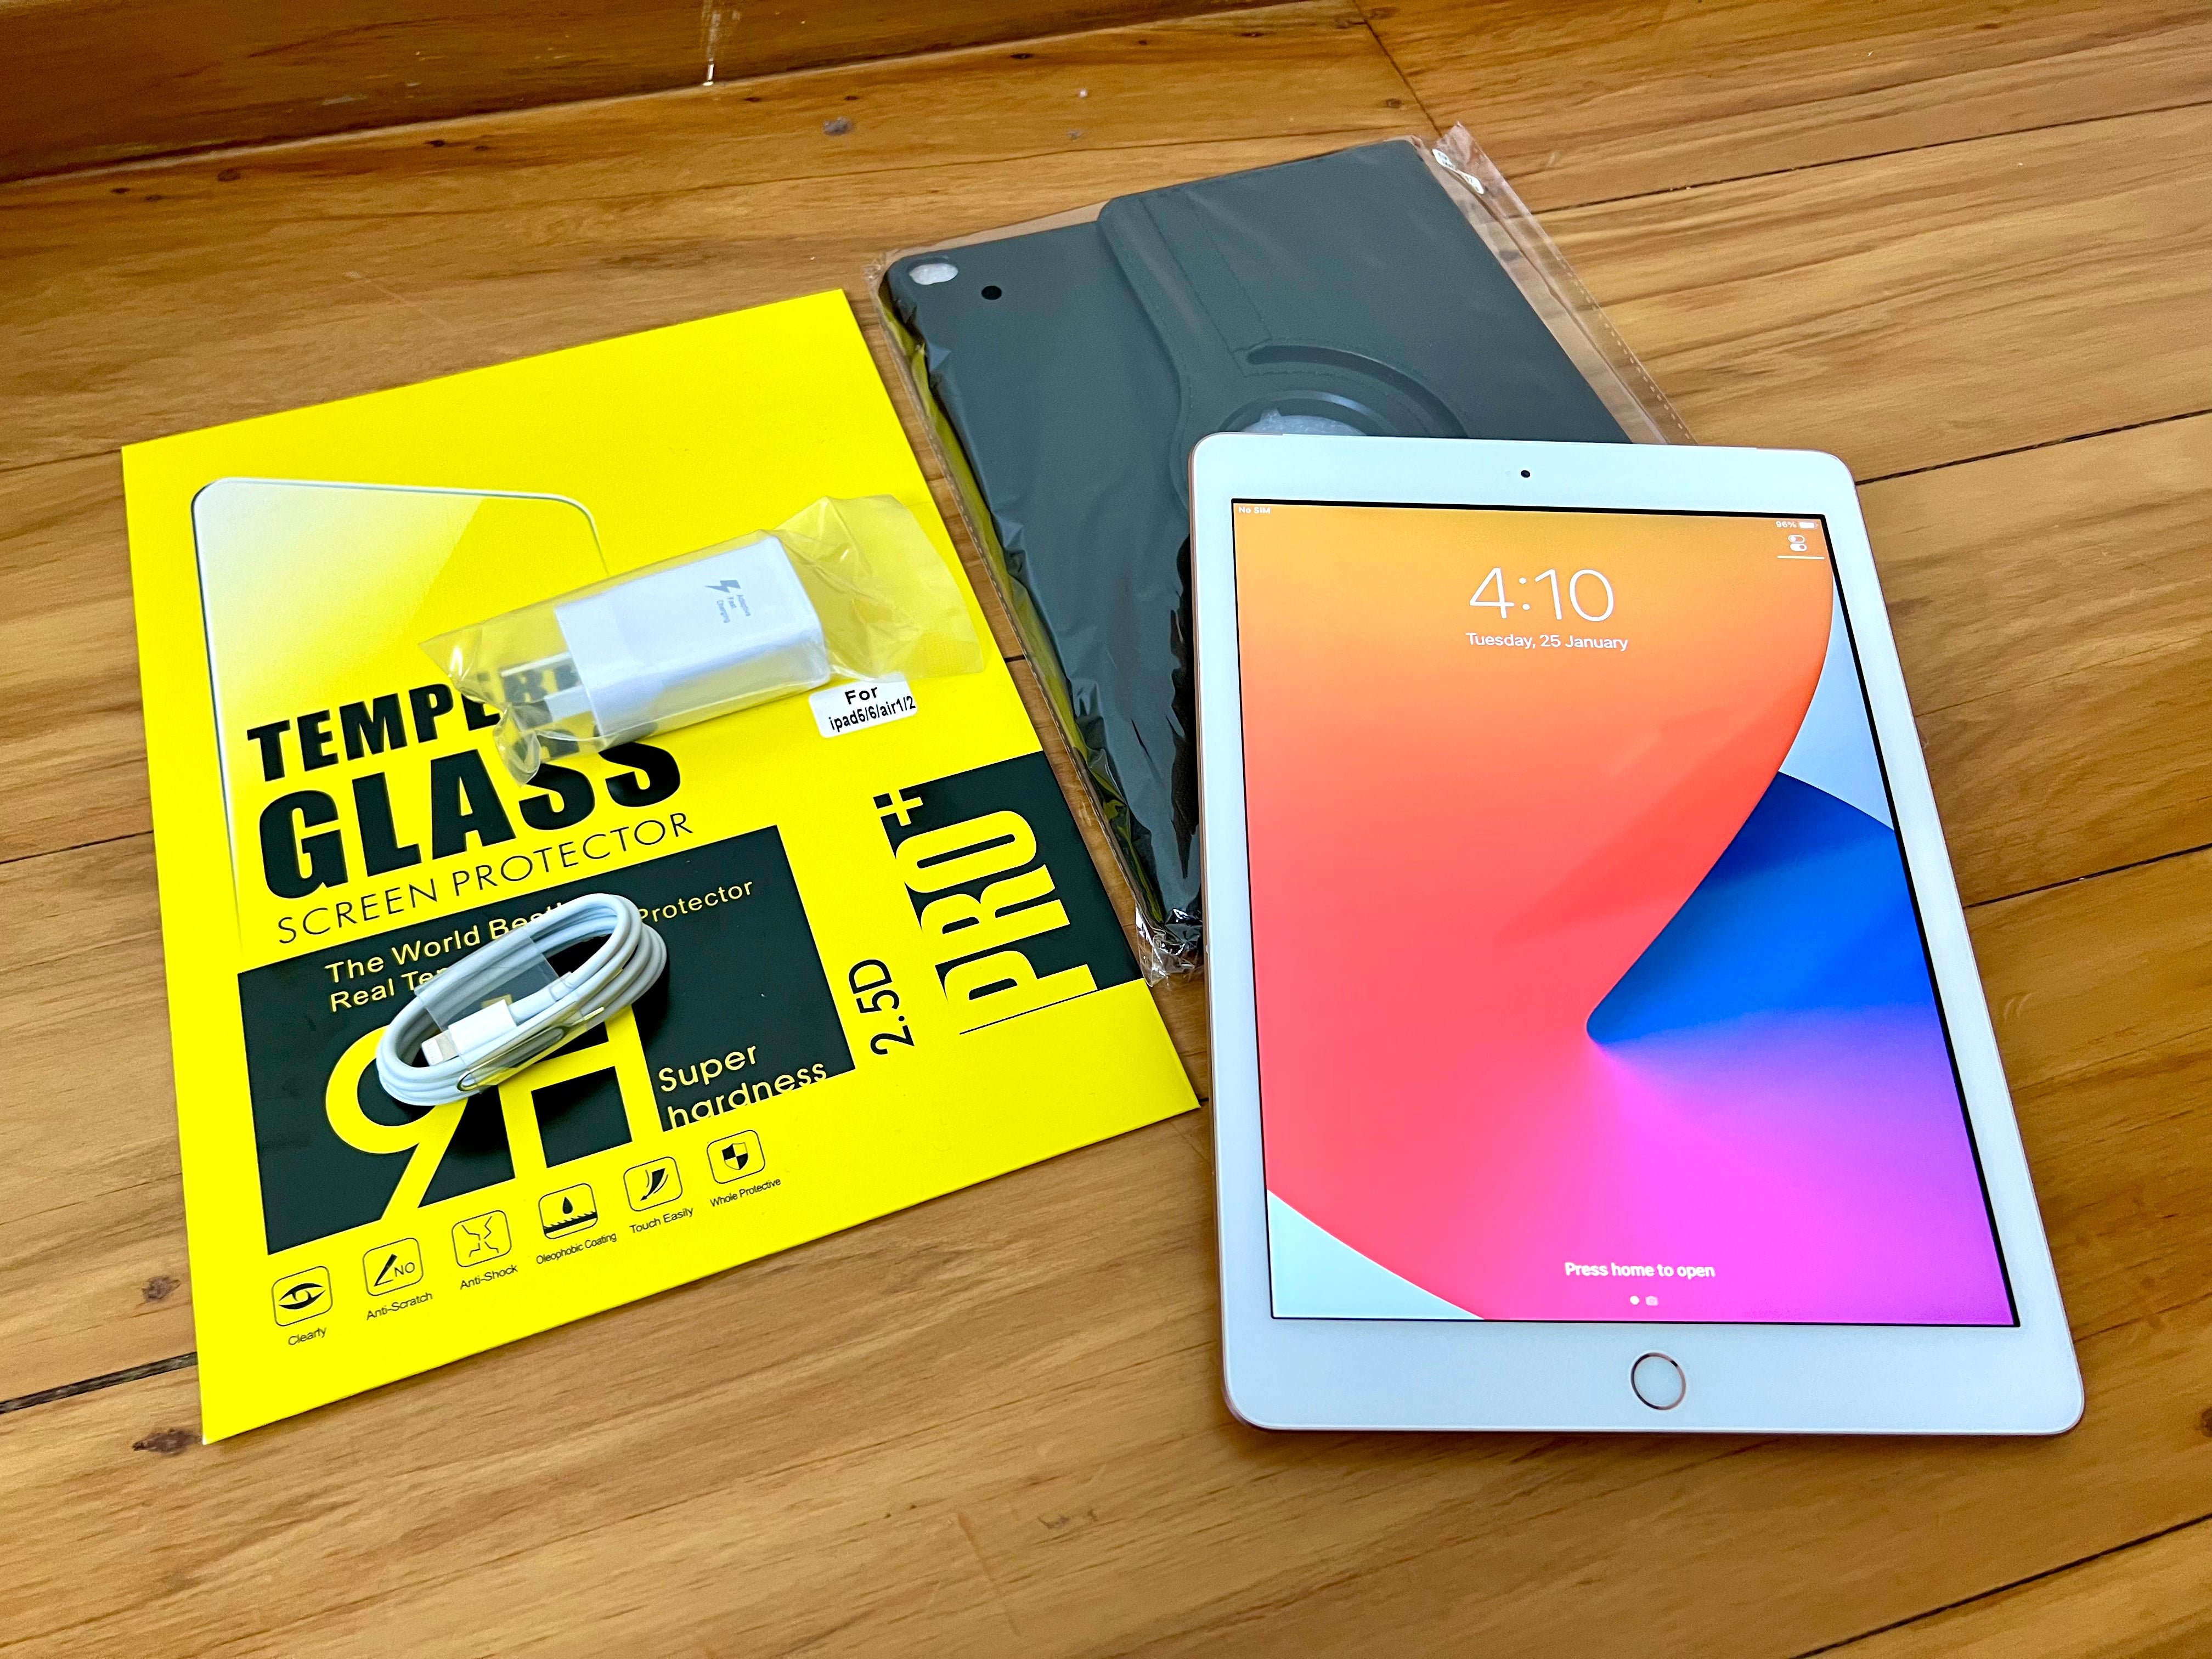 Apple iPad 6th Generation 32GB Wi-Fi + Cellular 3G/4G Gold (Like New) Shipping & New Glass Screen Protector*